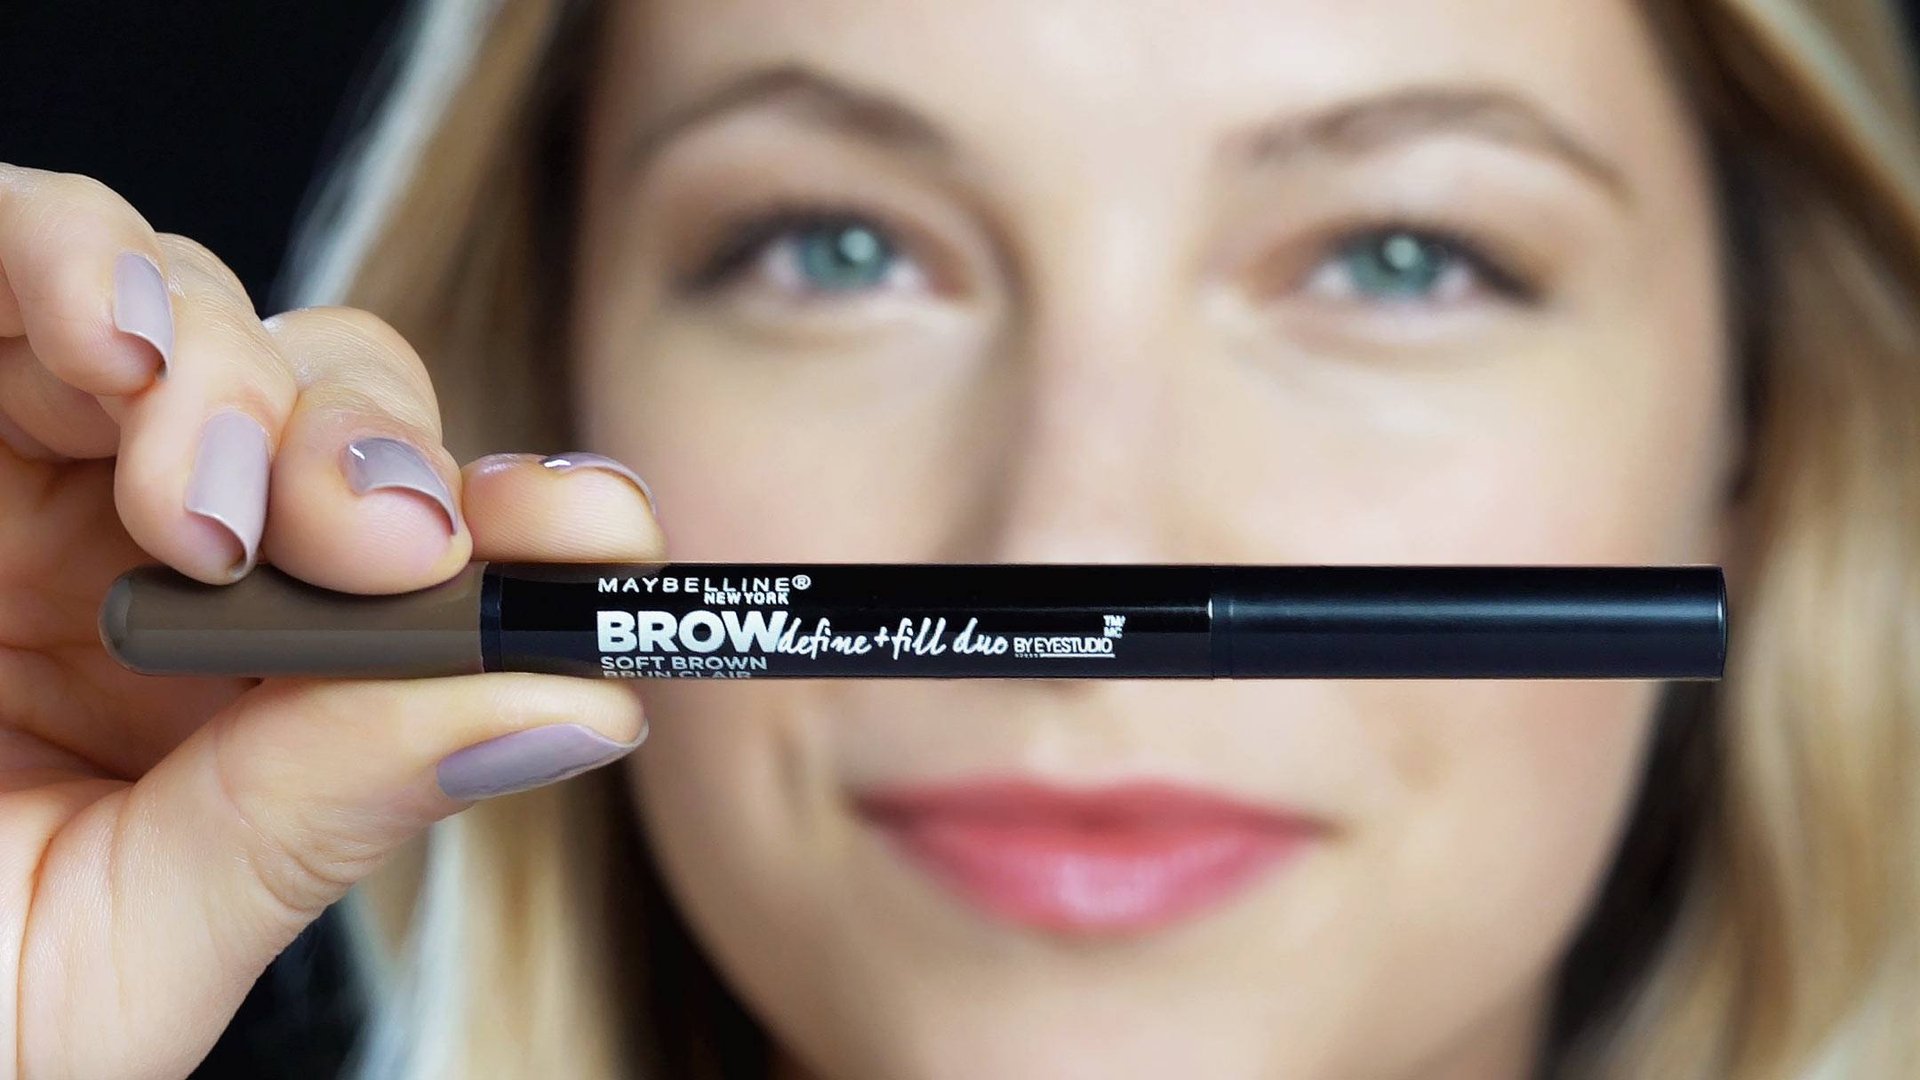 Focus on a Maybelline Brow Define and fill duo product, held by a Blond woman 